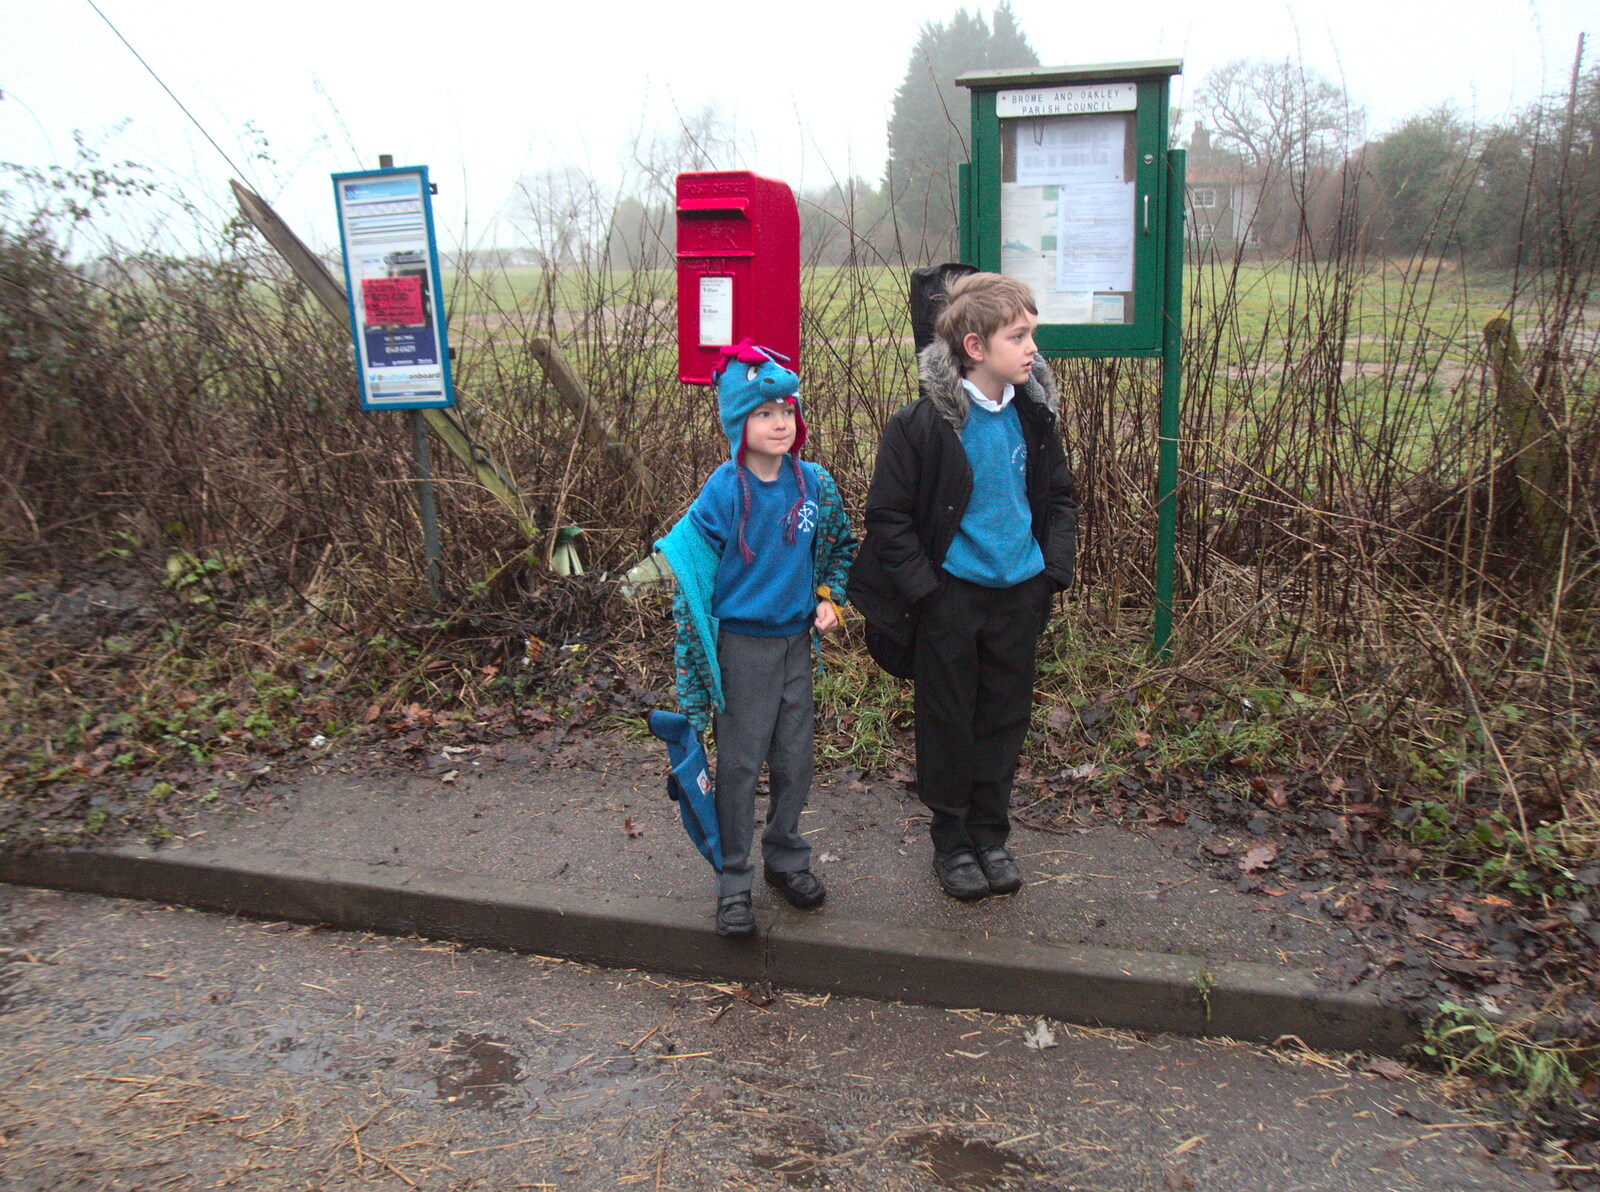 The boys wait at the bus stop from January Misc: Haircut 100, Diss, Norfolk - 14th January 2018